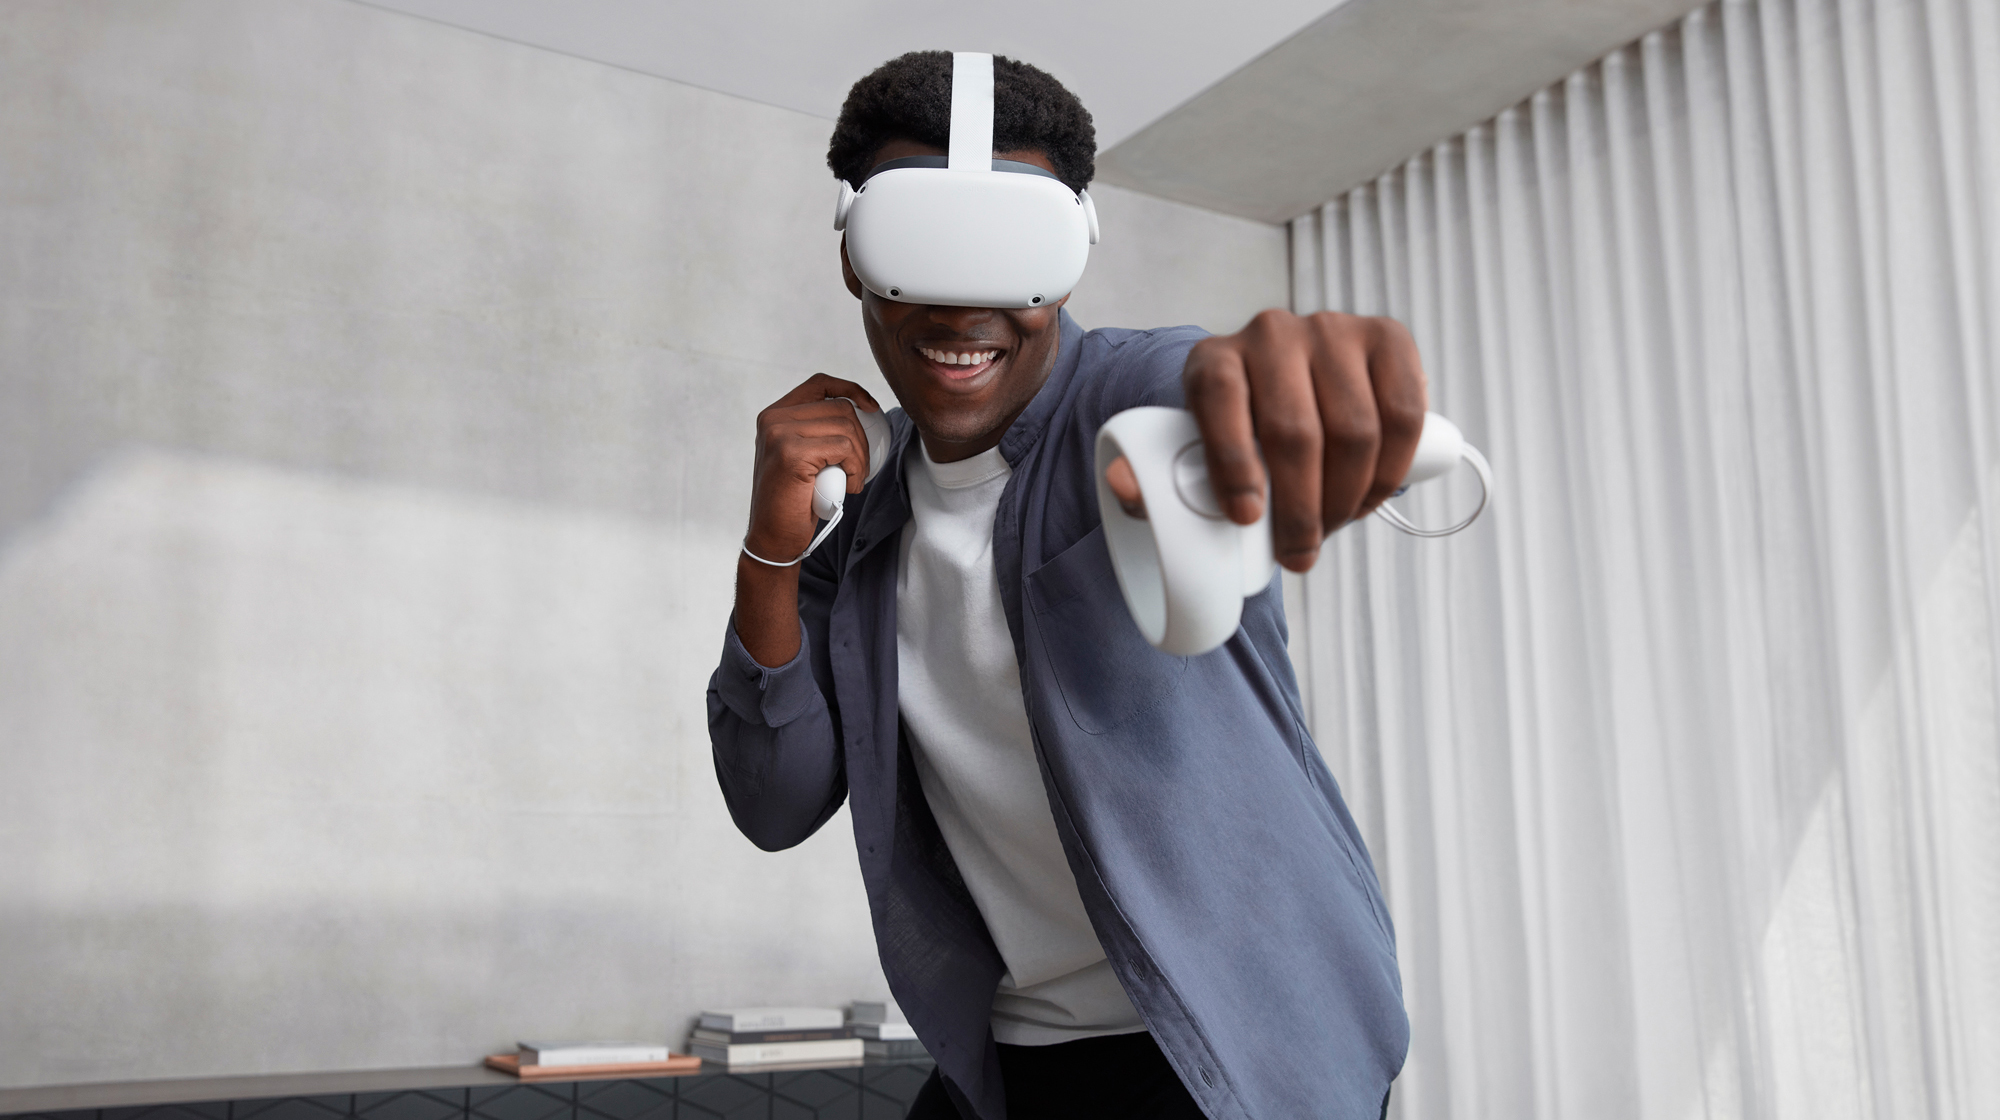 Oculus Quest 2 On Head